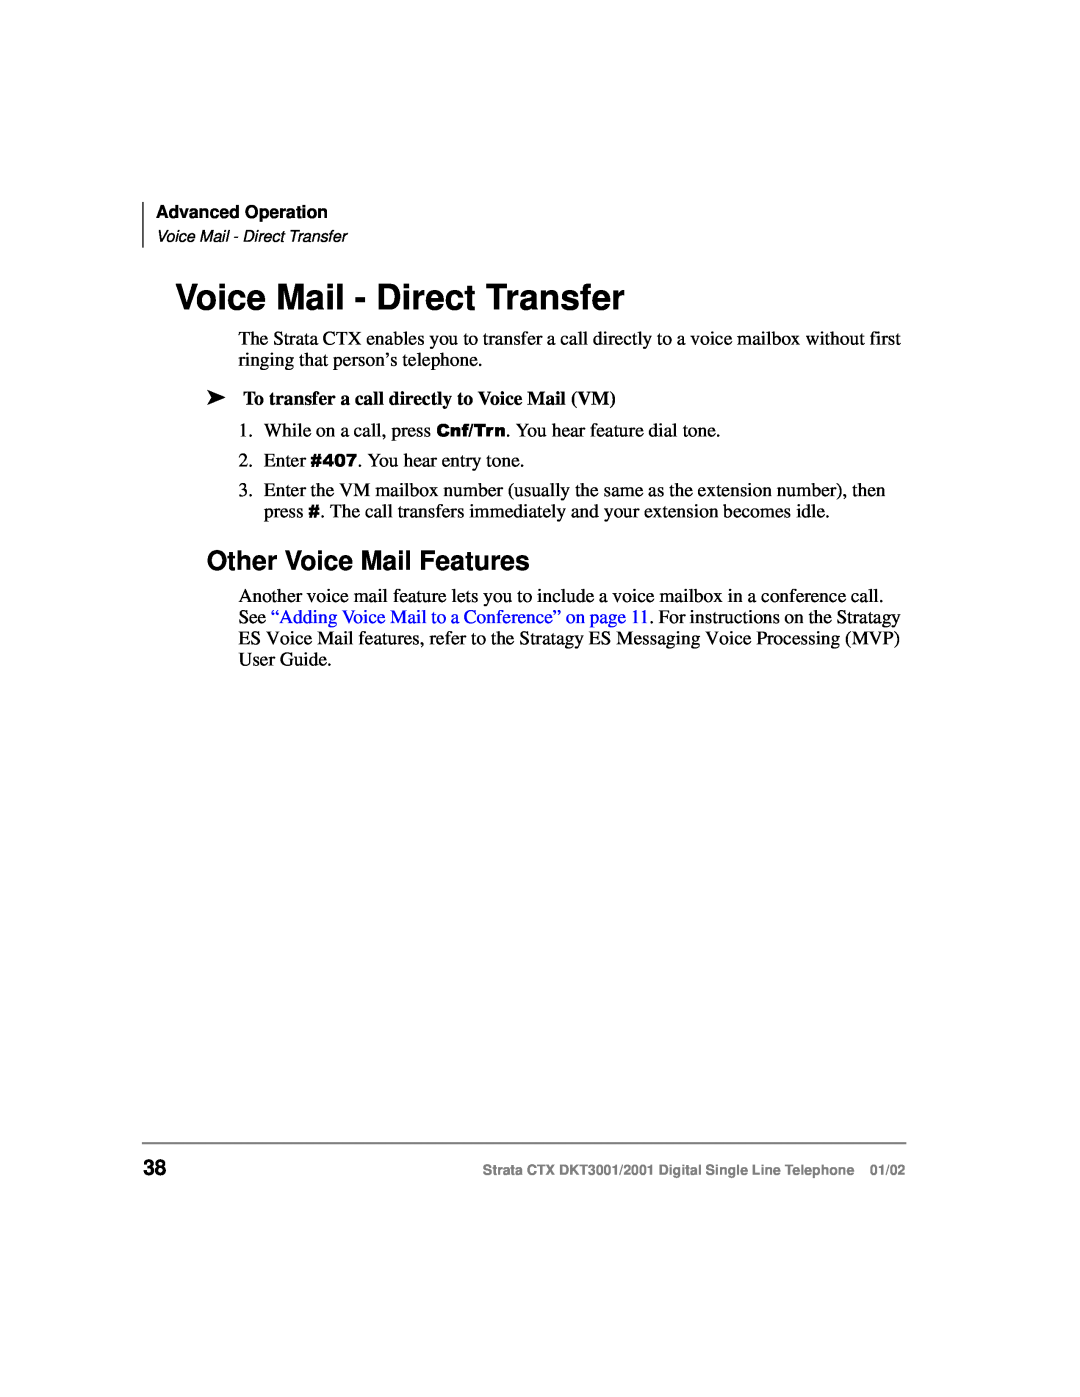 Toshiba DXT3001 Voice Mail - Direct Transfer, Other Voice Mail Features, To transfer a call directly to Voice Mail VM 